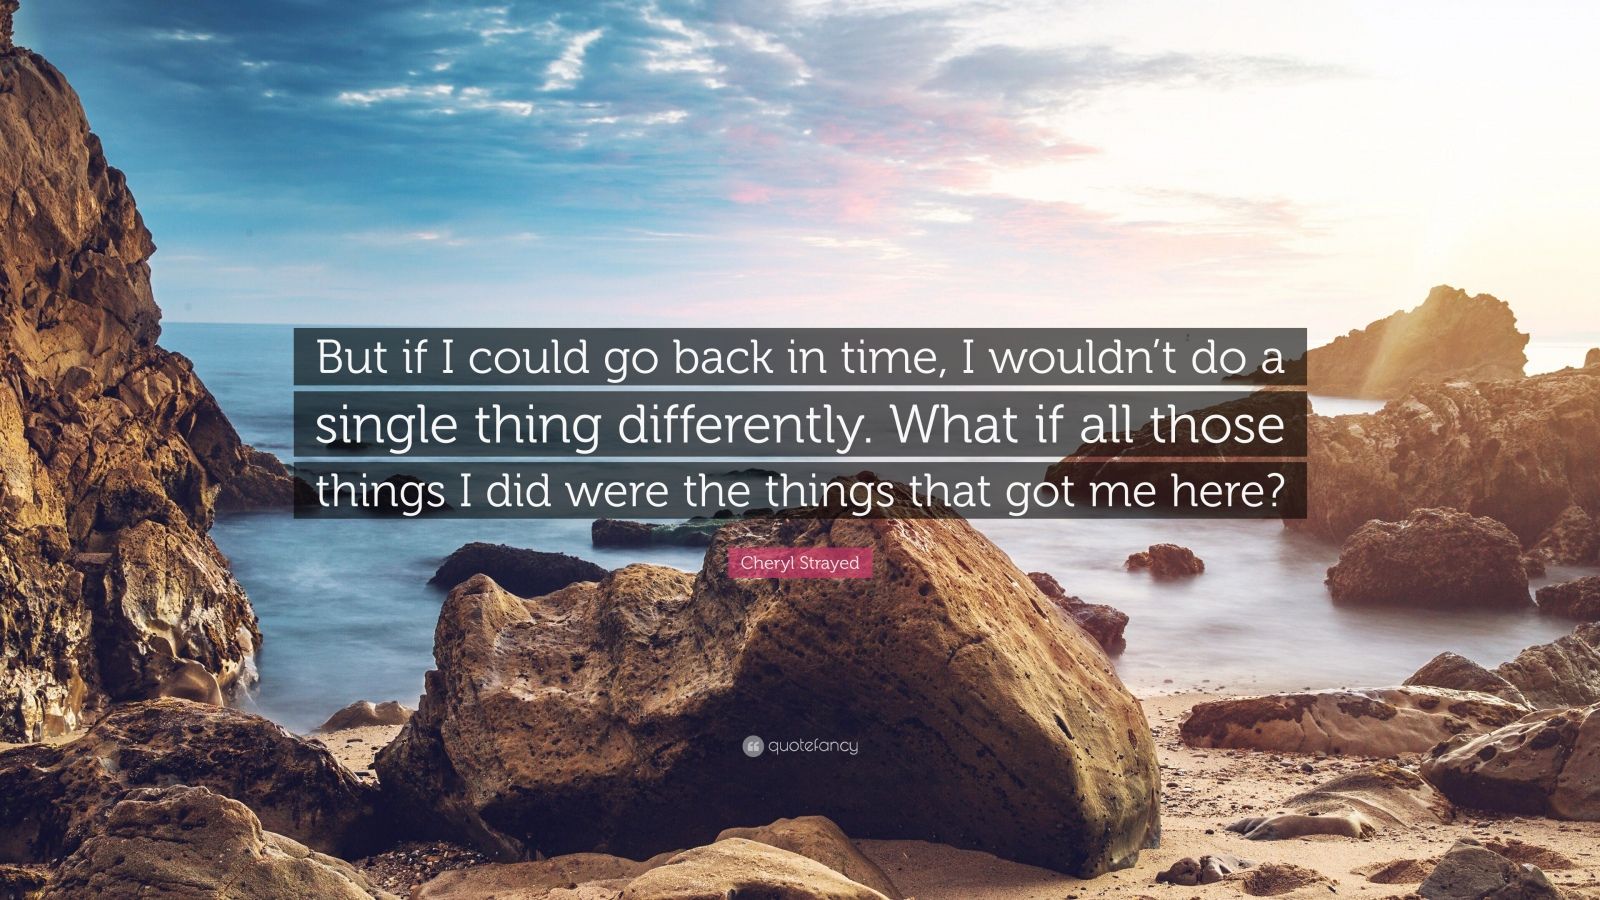 Cheryl Strayed Quote: “But if I could go back in time, I wouldn’t do a ...